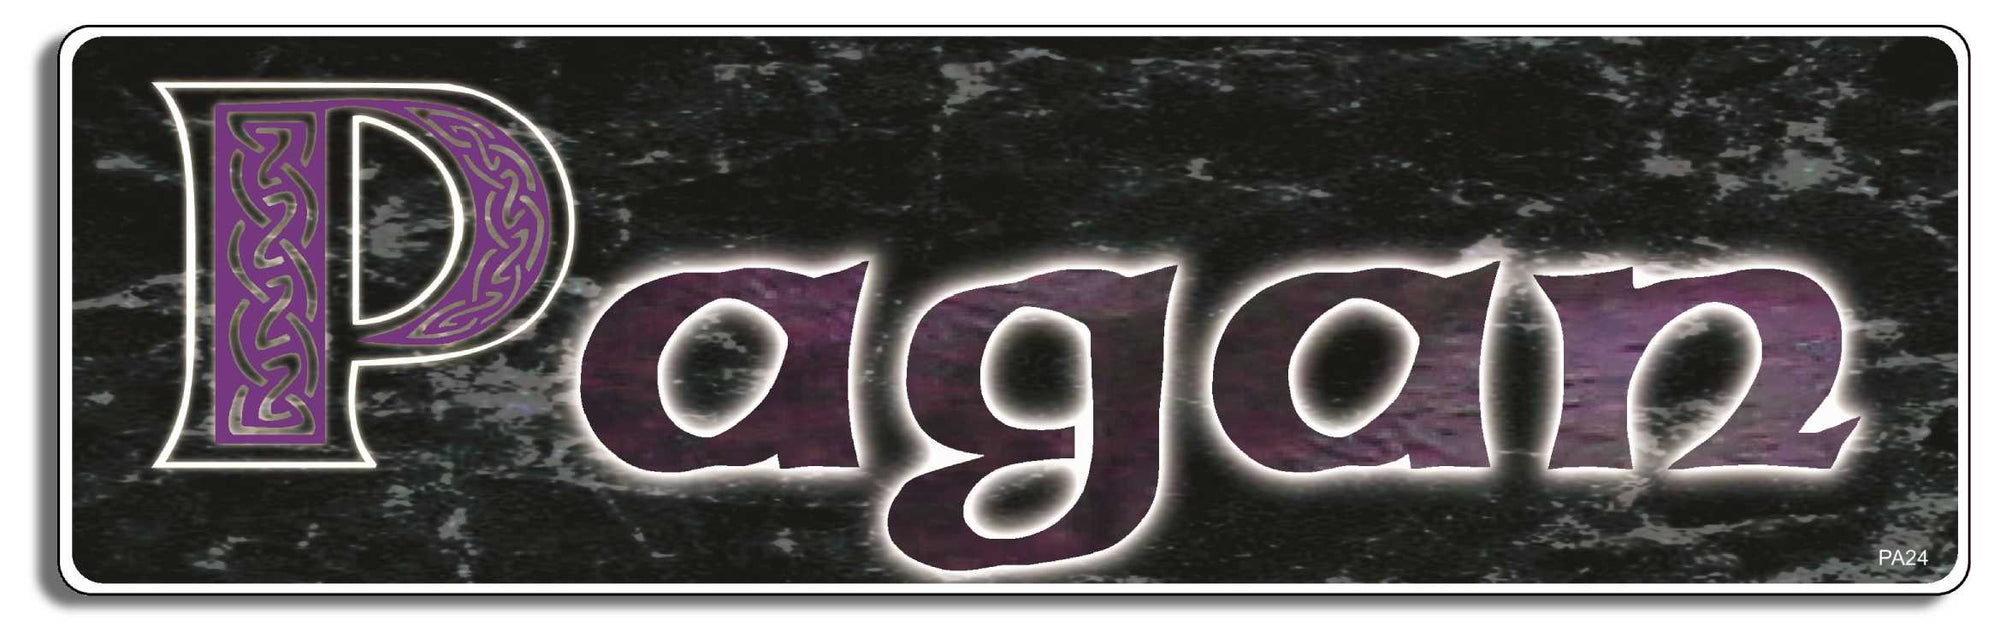 Pagan - 3" x 10" Bumper Sticker--Car Magnet- -  Decal Bumper Sticker-pagan Bumper Sticker Car Magnet Pagan-    Decal for carsatheist, pagan, wiccan, witch